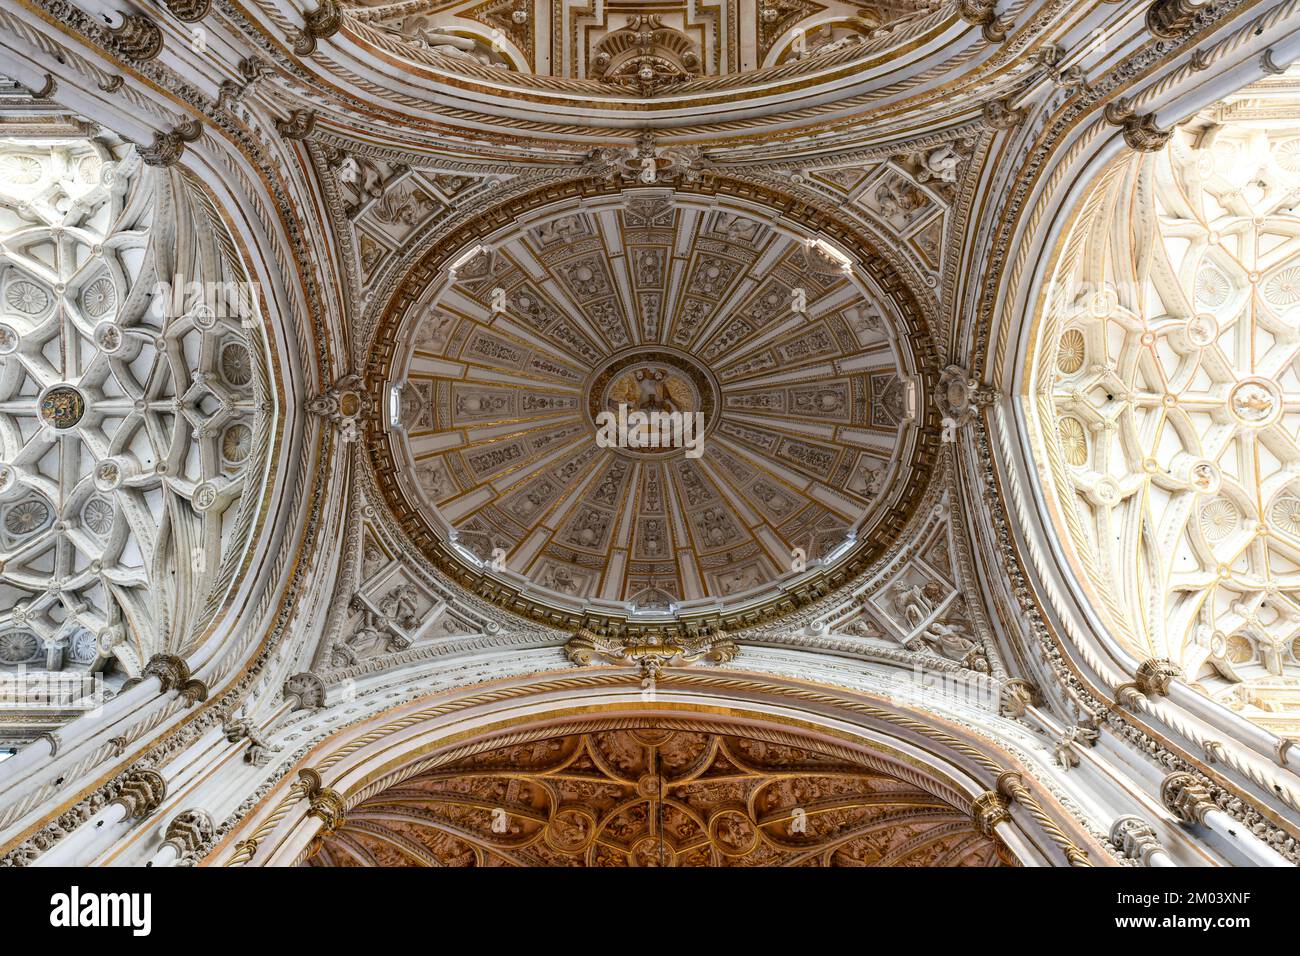 Cordoba, Spain - Nov 28, 2021: Cathedral Mosque of Cordoba, Spain. the Great Mosque of Cordoba is one of the oldest structures still standing from the Stock Photo